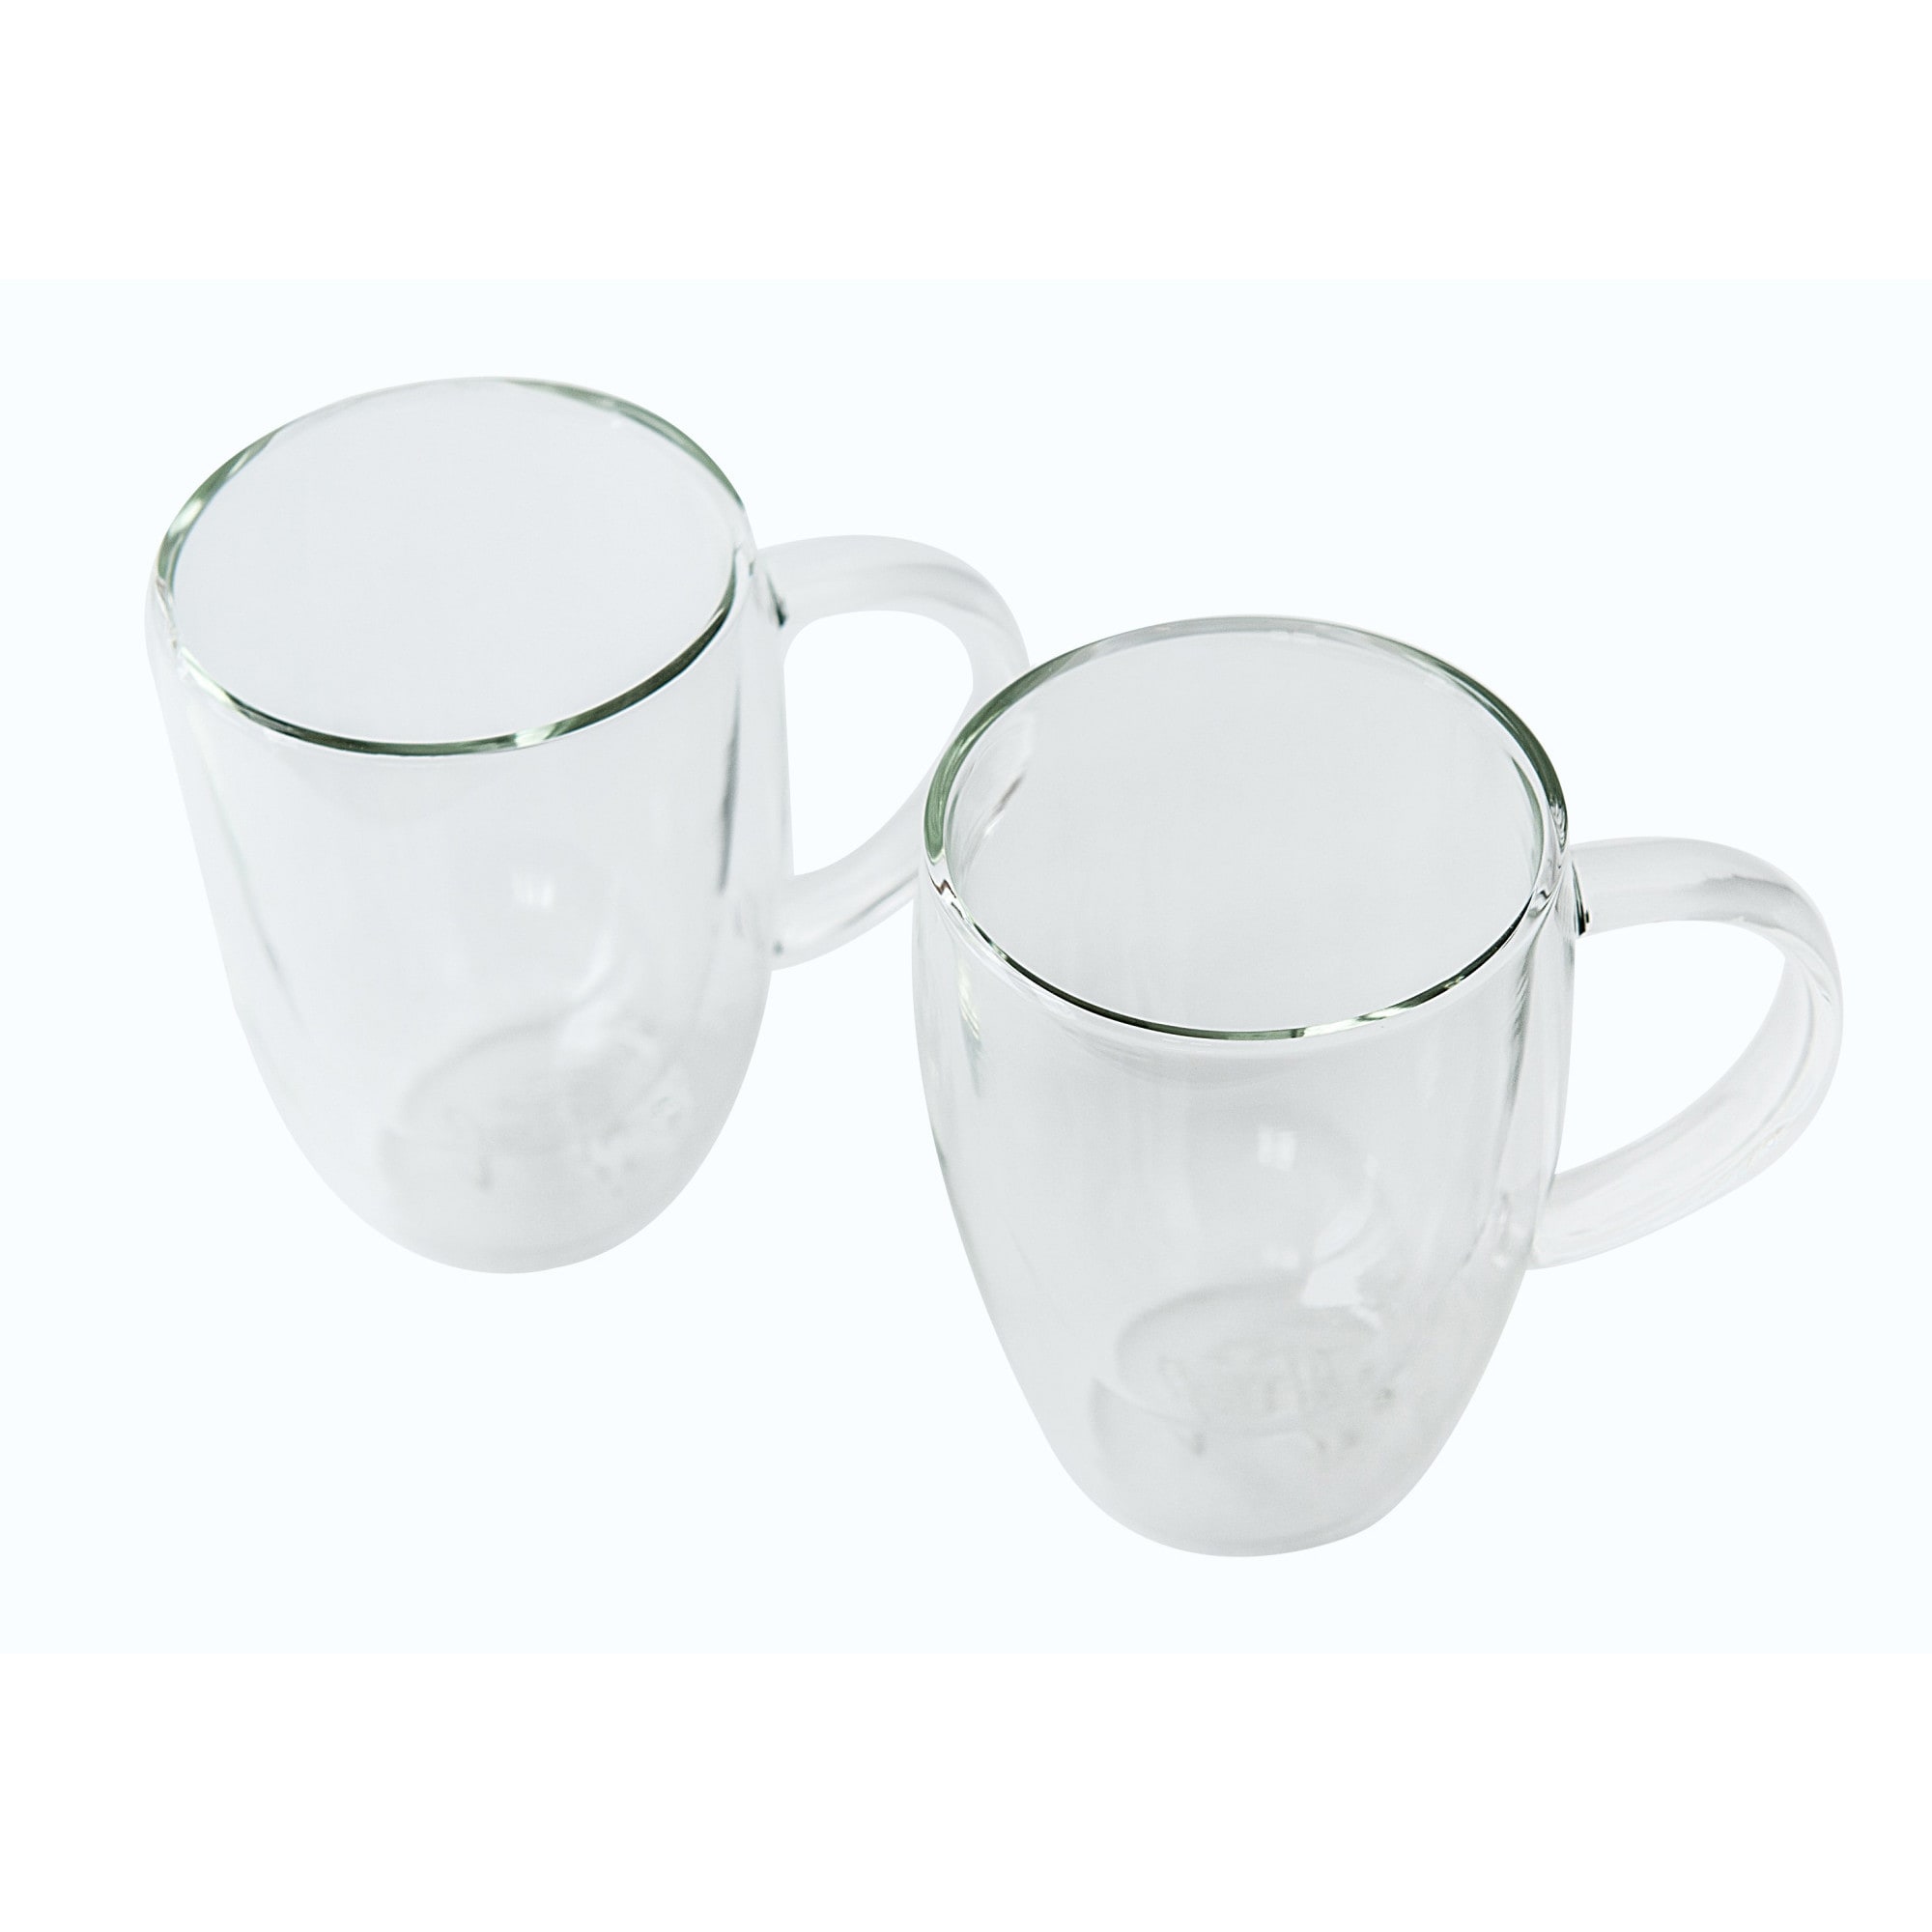 https://ak1.ostkcdn.com/images/products/19745820/Milk-Frother-and-Set-of-12-12oz-Bistro-Mugs-from-JavaFly-Double-Walled-Glasses-cb273c17-66b1-405e-b9ce-f254f8ec5ce4.jpg